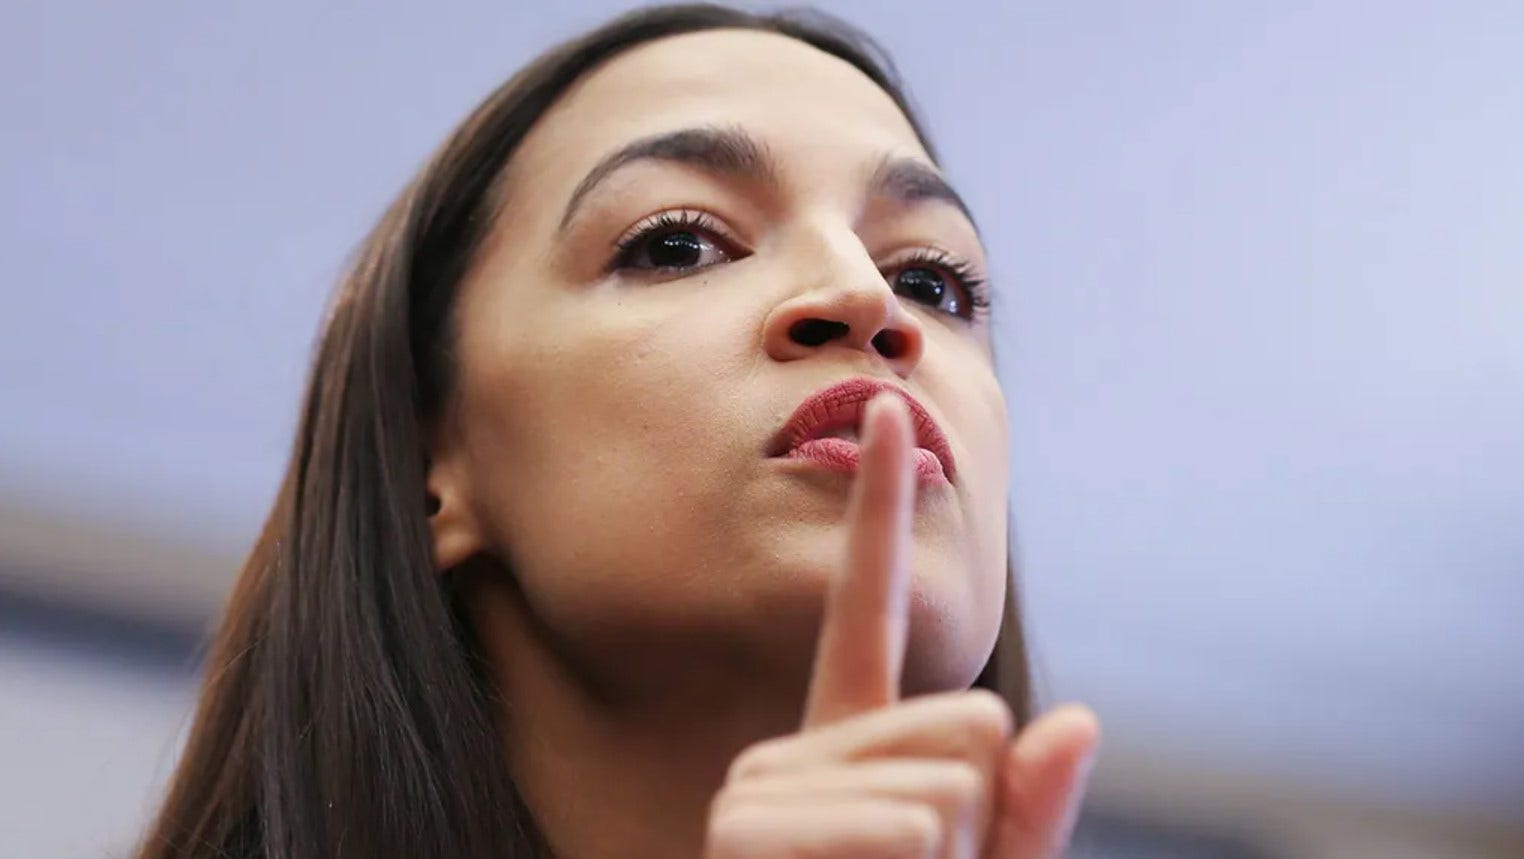 ‘No sympathy’: AOC blasted for complaining about harassment though she belittled Kavanaugh’s harassment